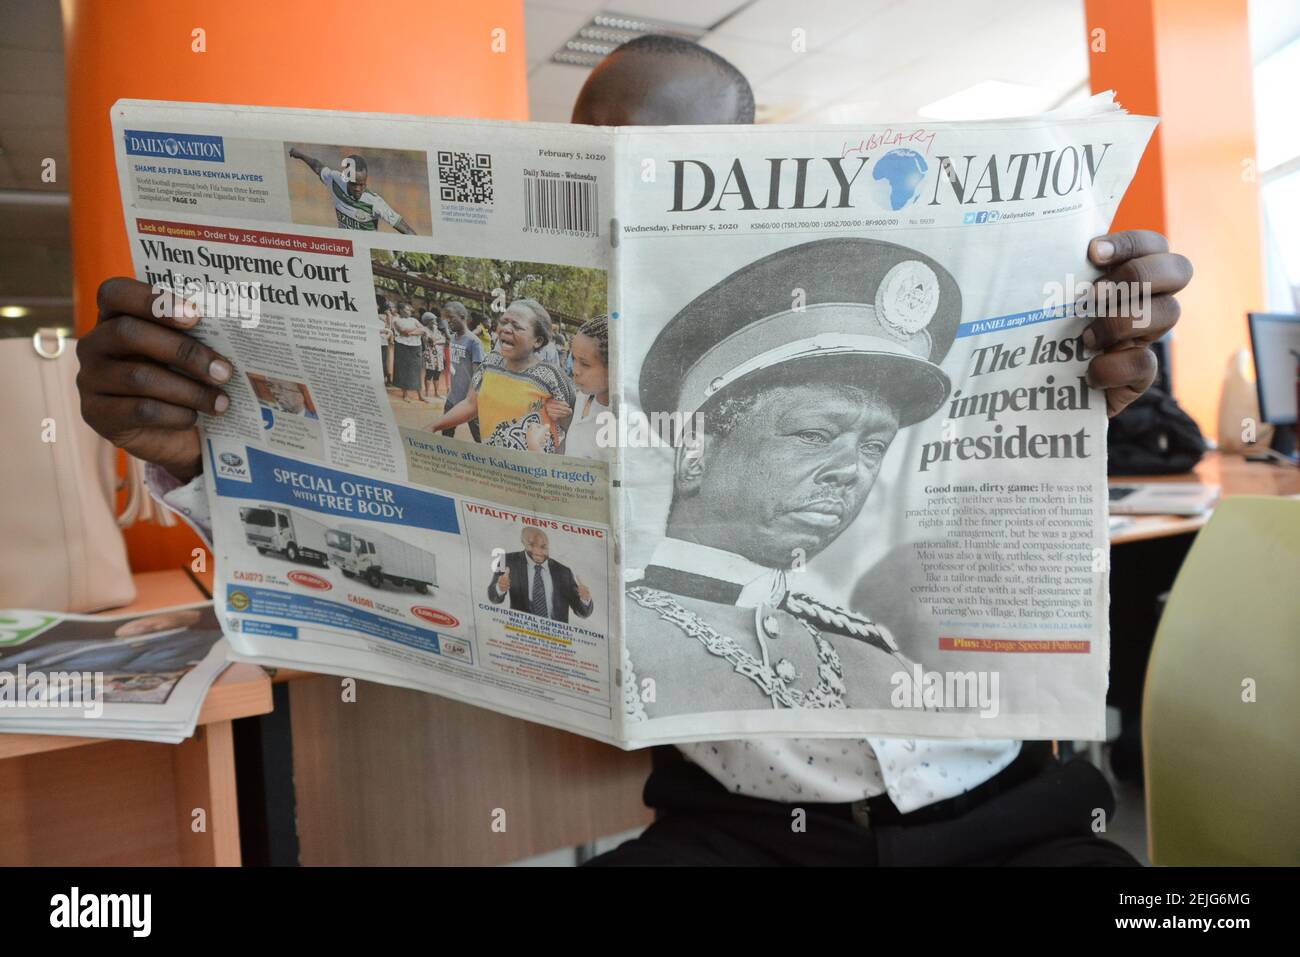 daily nation newspaper today news